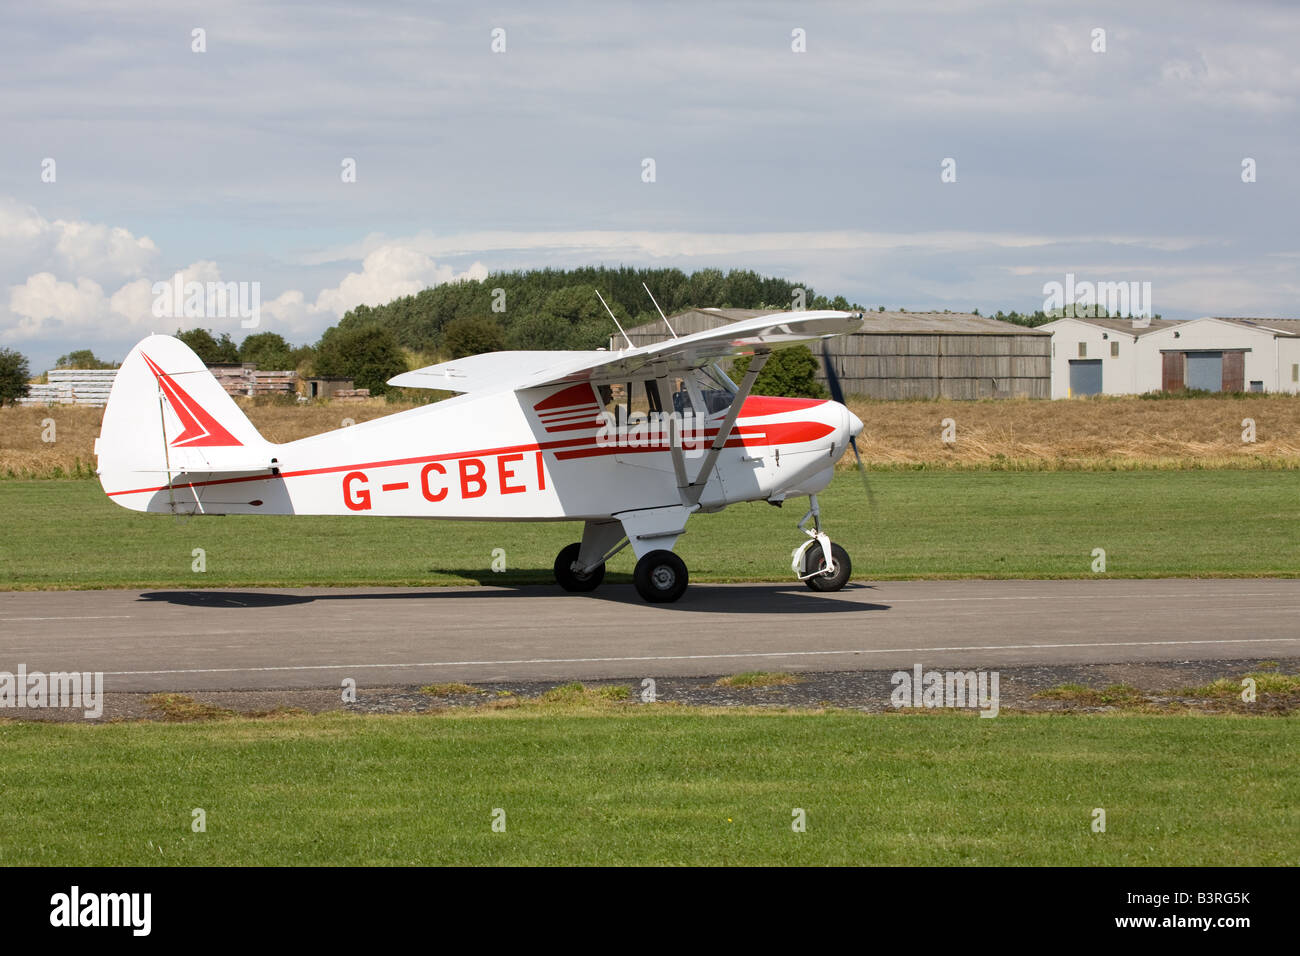 Piper PA-22-108 Colt G-CBEI  taxiing at Breighton Airfield Stock Photo